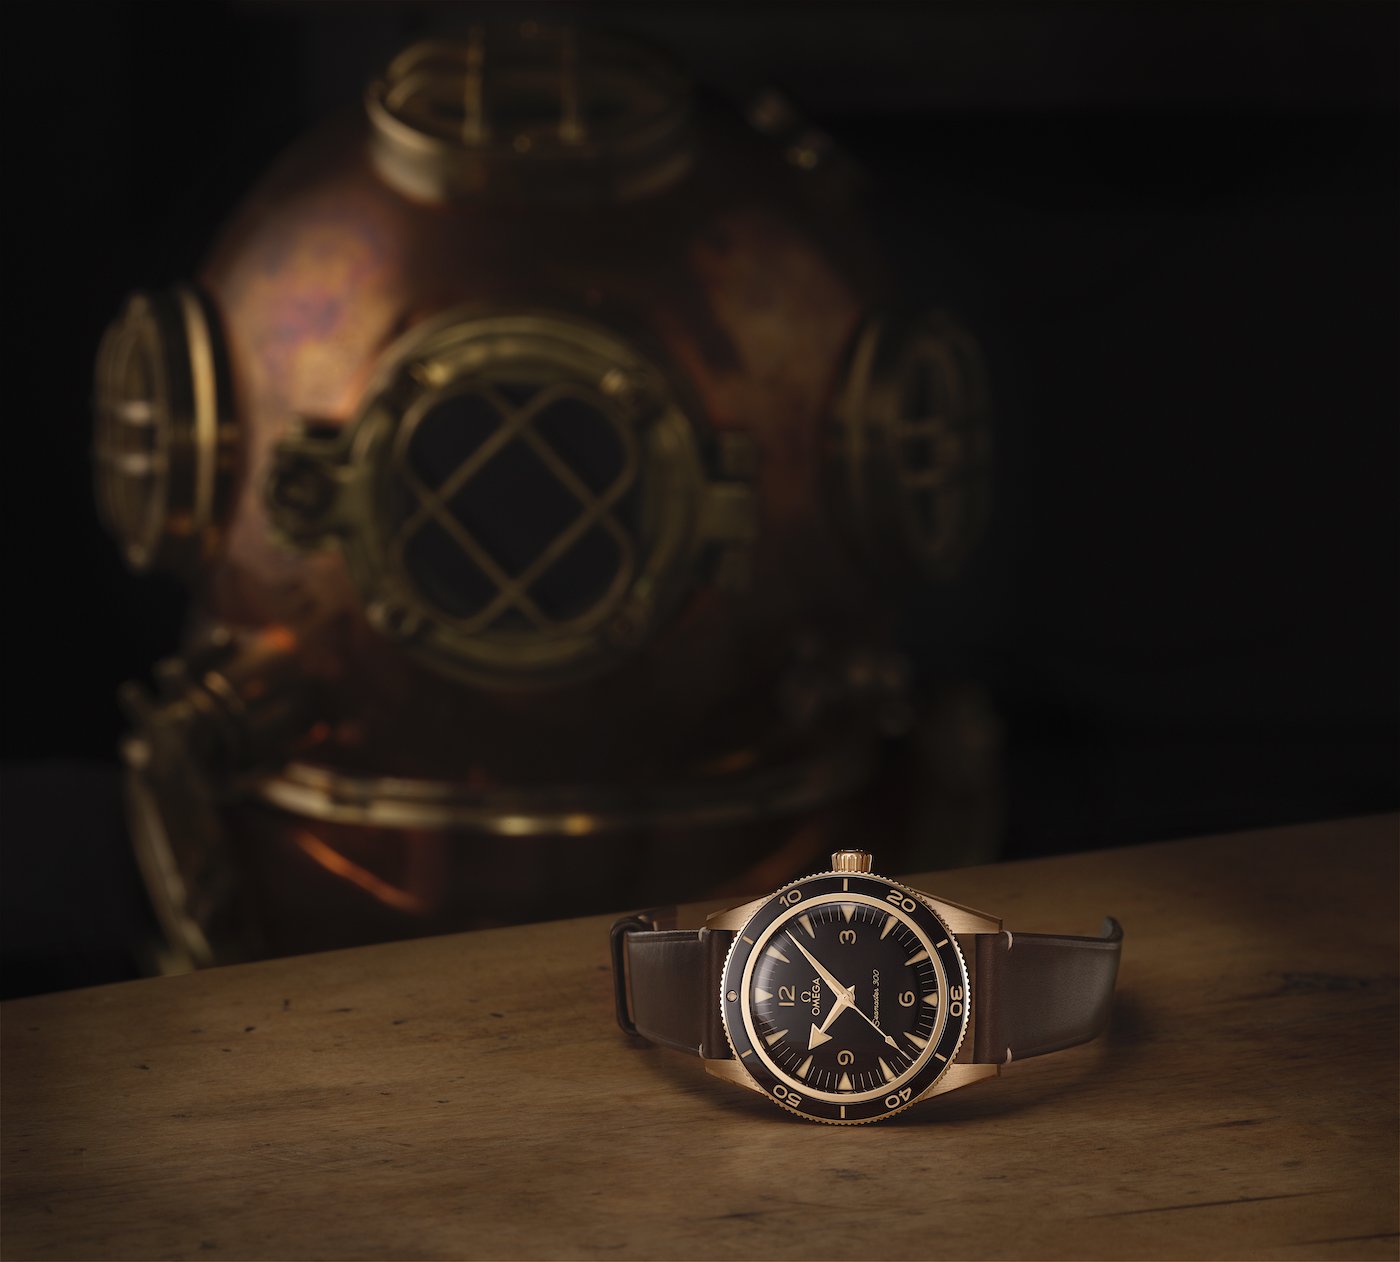 Introducing Omega's new Seamaster 300, including Bronze Gold